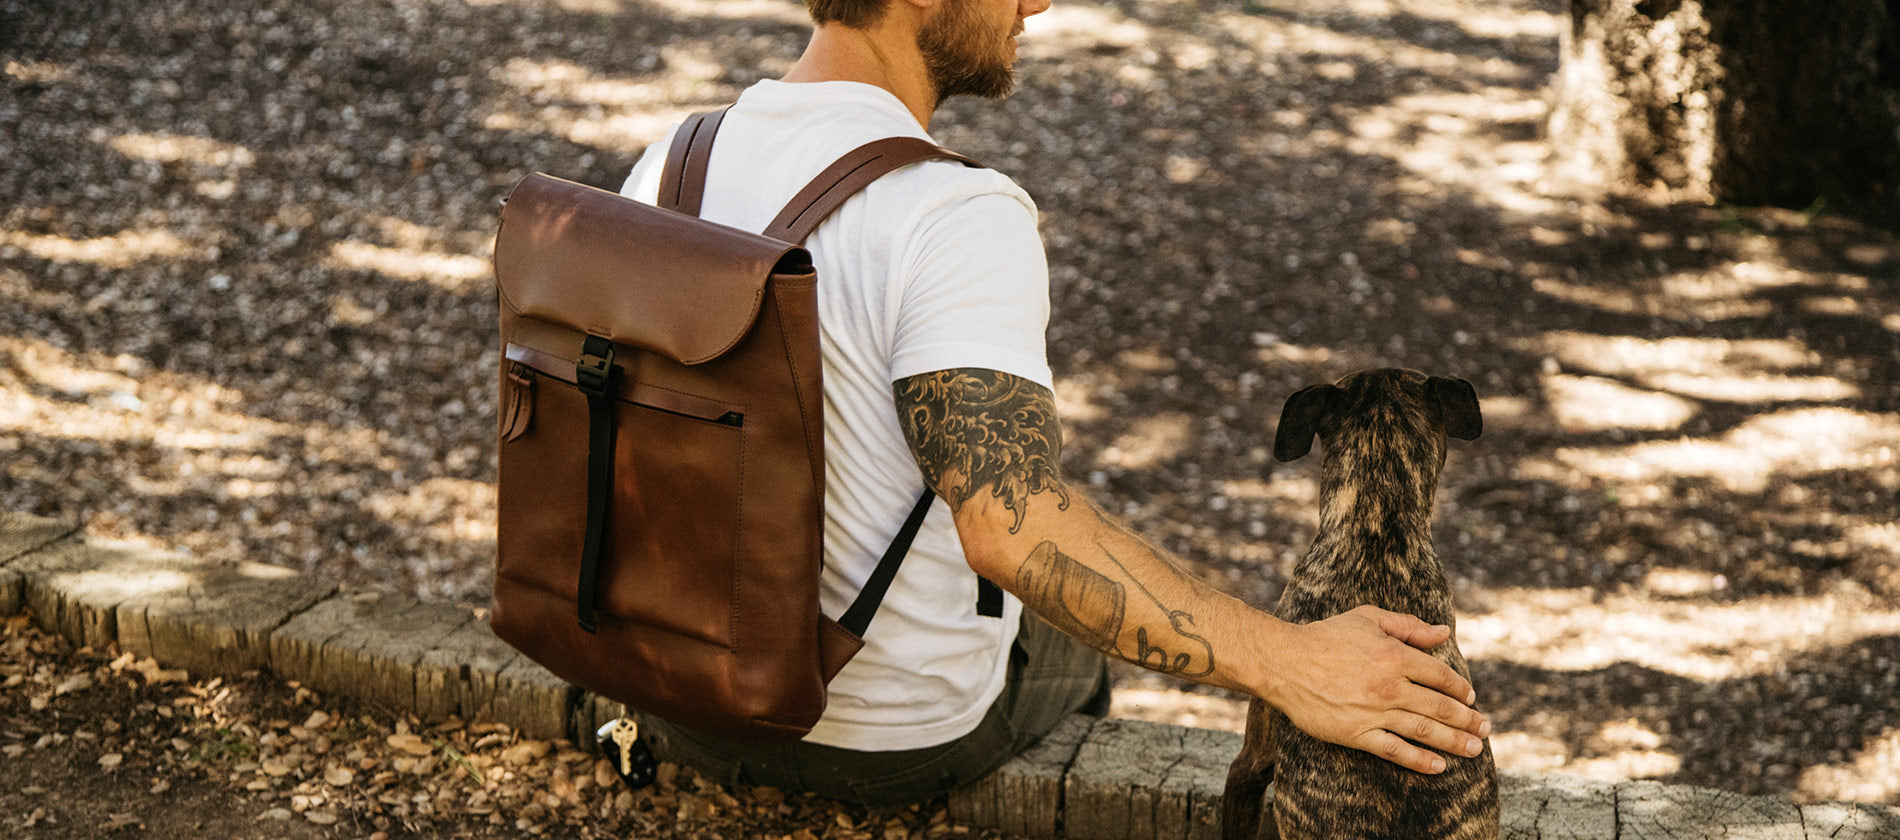 A man with a cognac leather backpack sitting on a trail divider while placing his hand on a bindle colored dog.